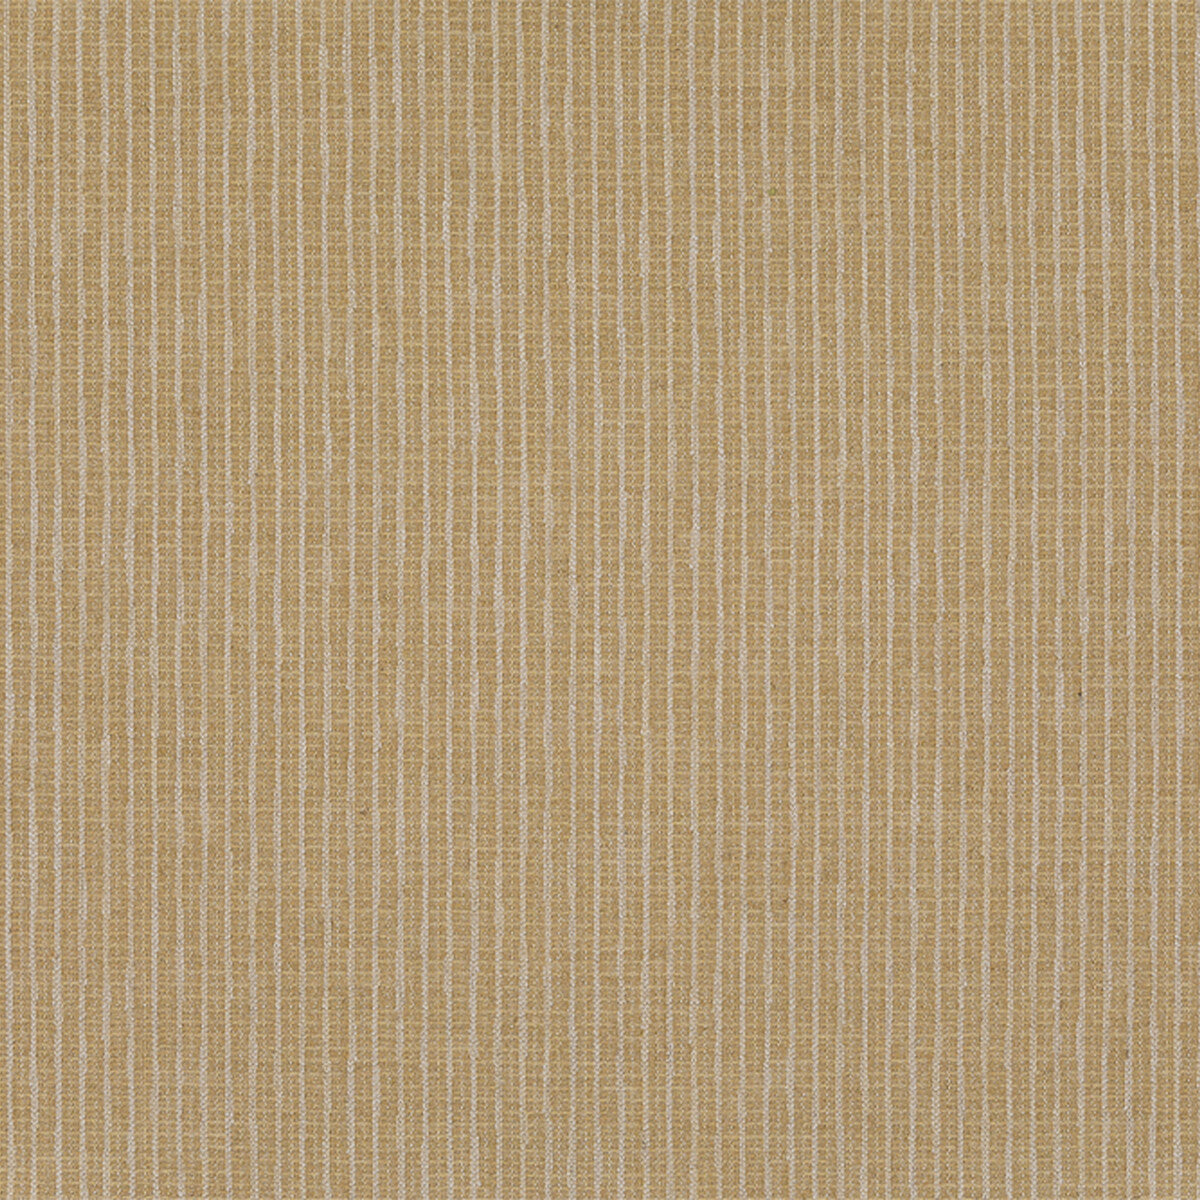 Bailey fabric in gold color - pattern BFC-3700.4.0 - by Lee Jofa in the Blithfield collection